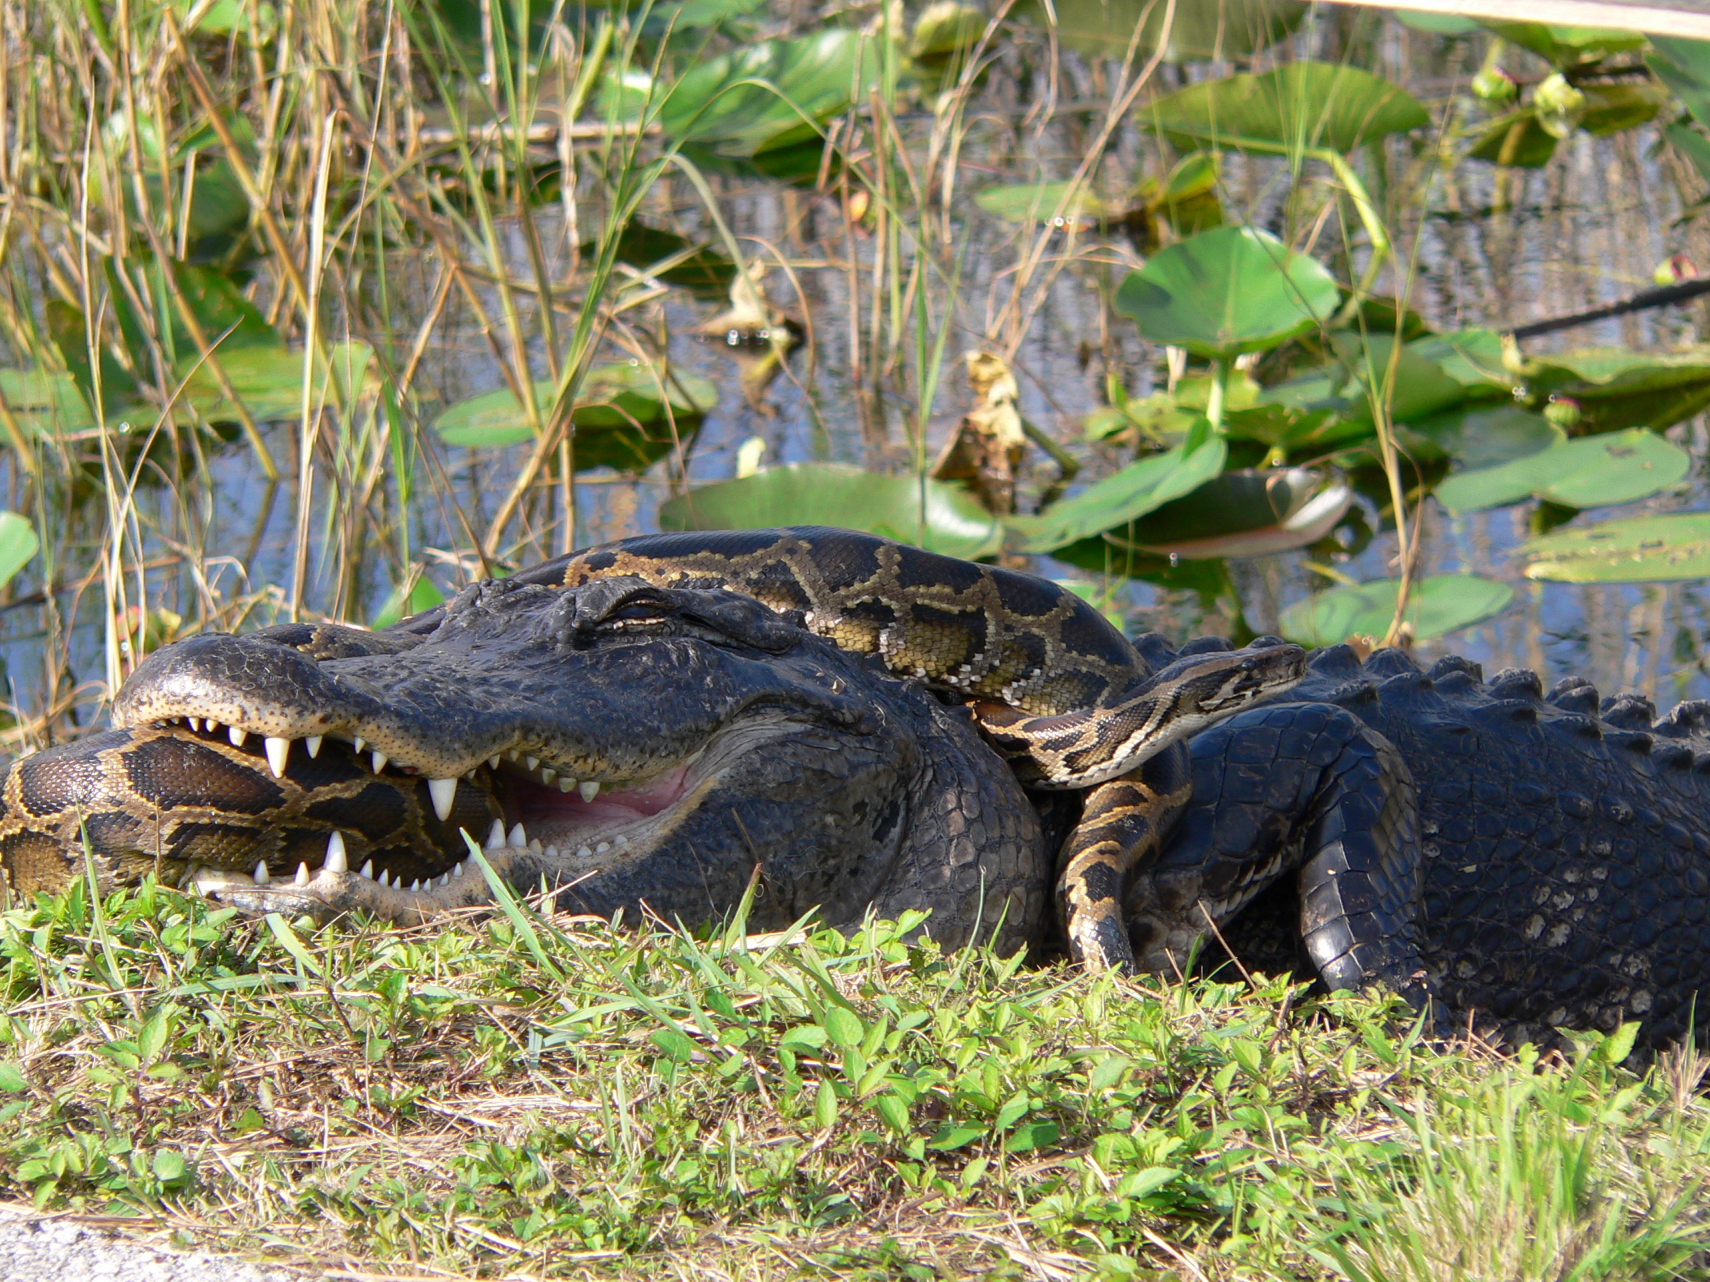 python wrapped around alligator head and upper body near edge of water